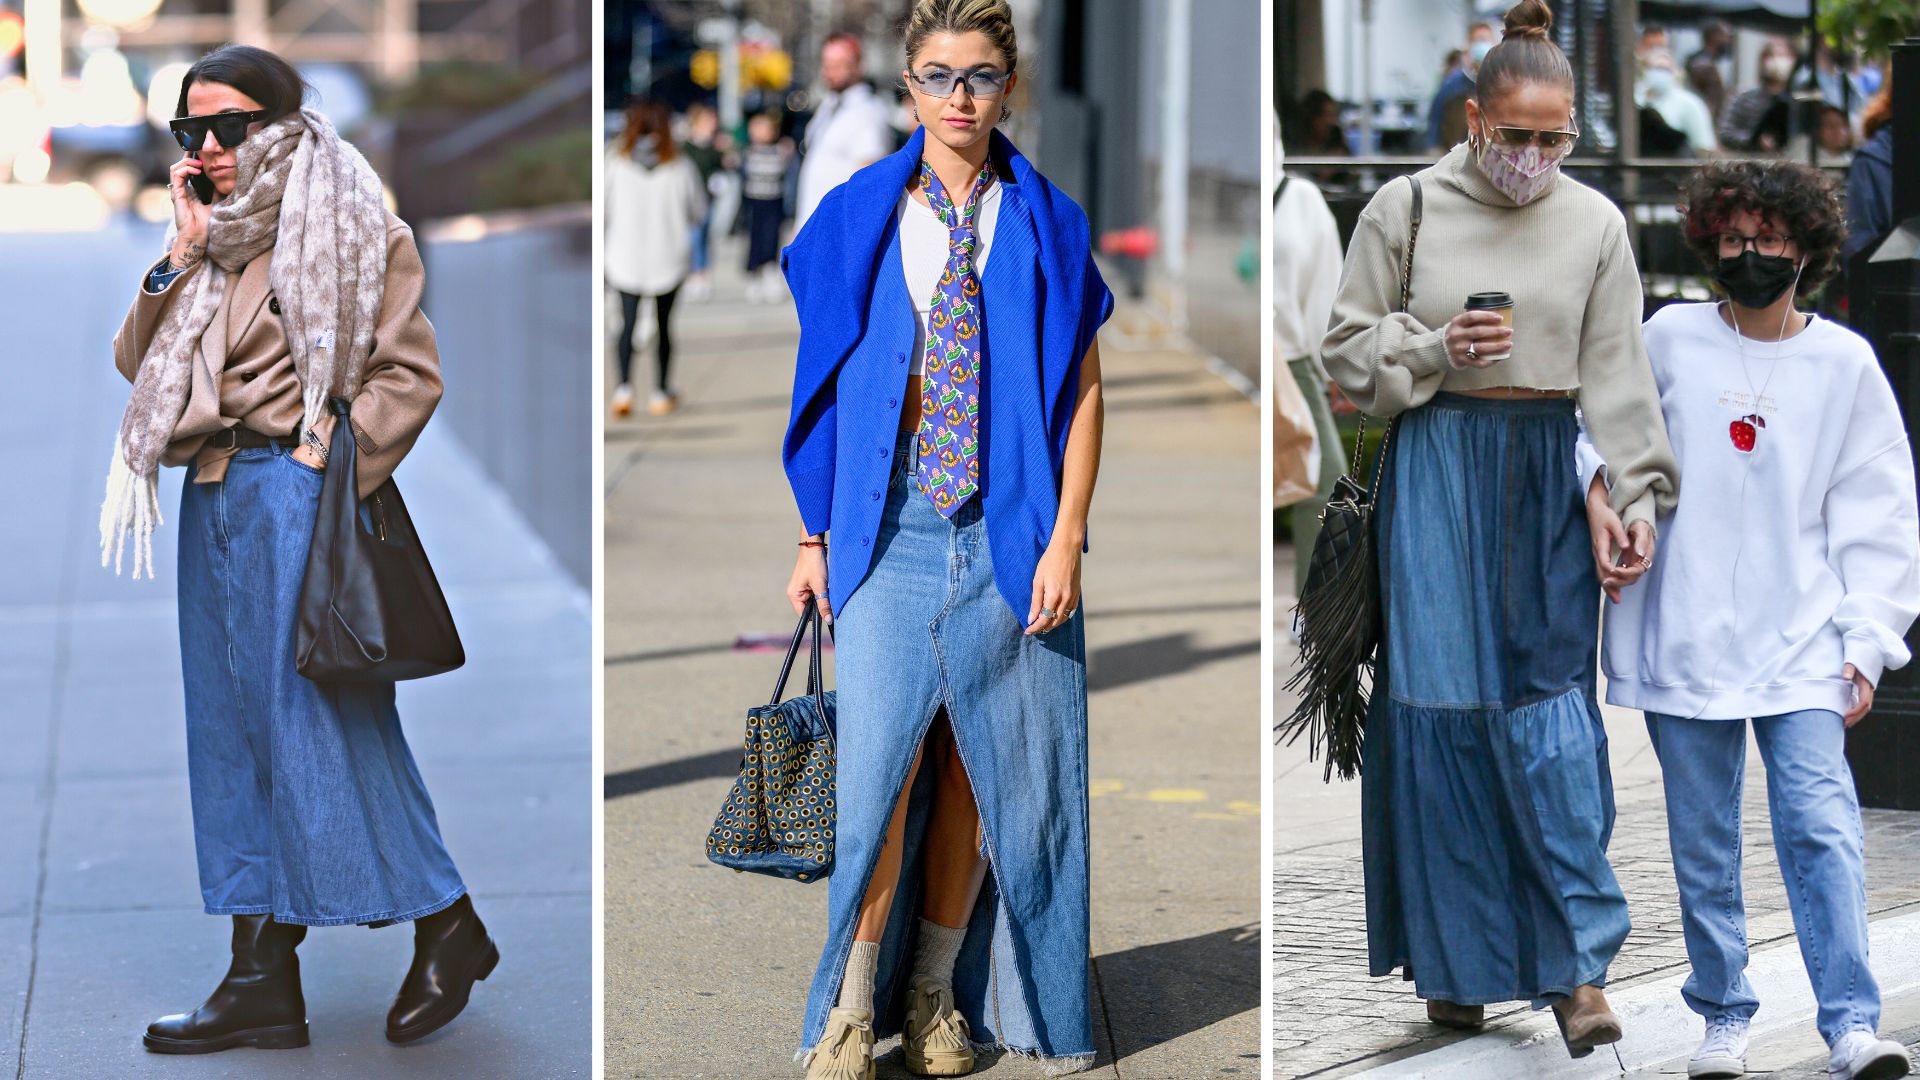 The '90s denim staple in your closet is making a comeback | Woman & Home